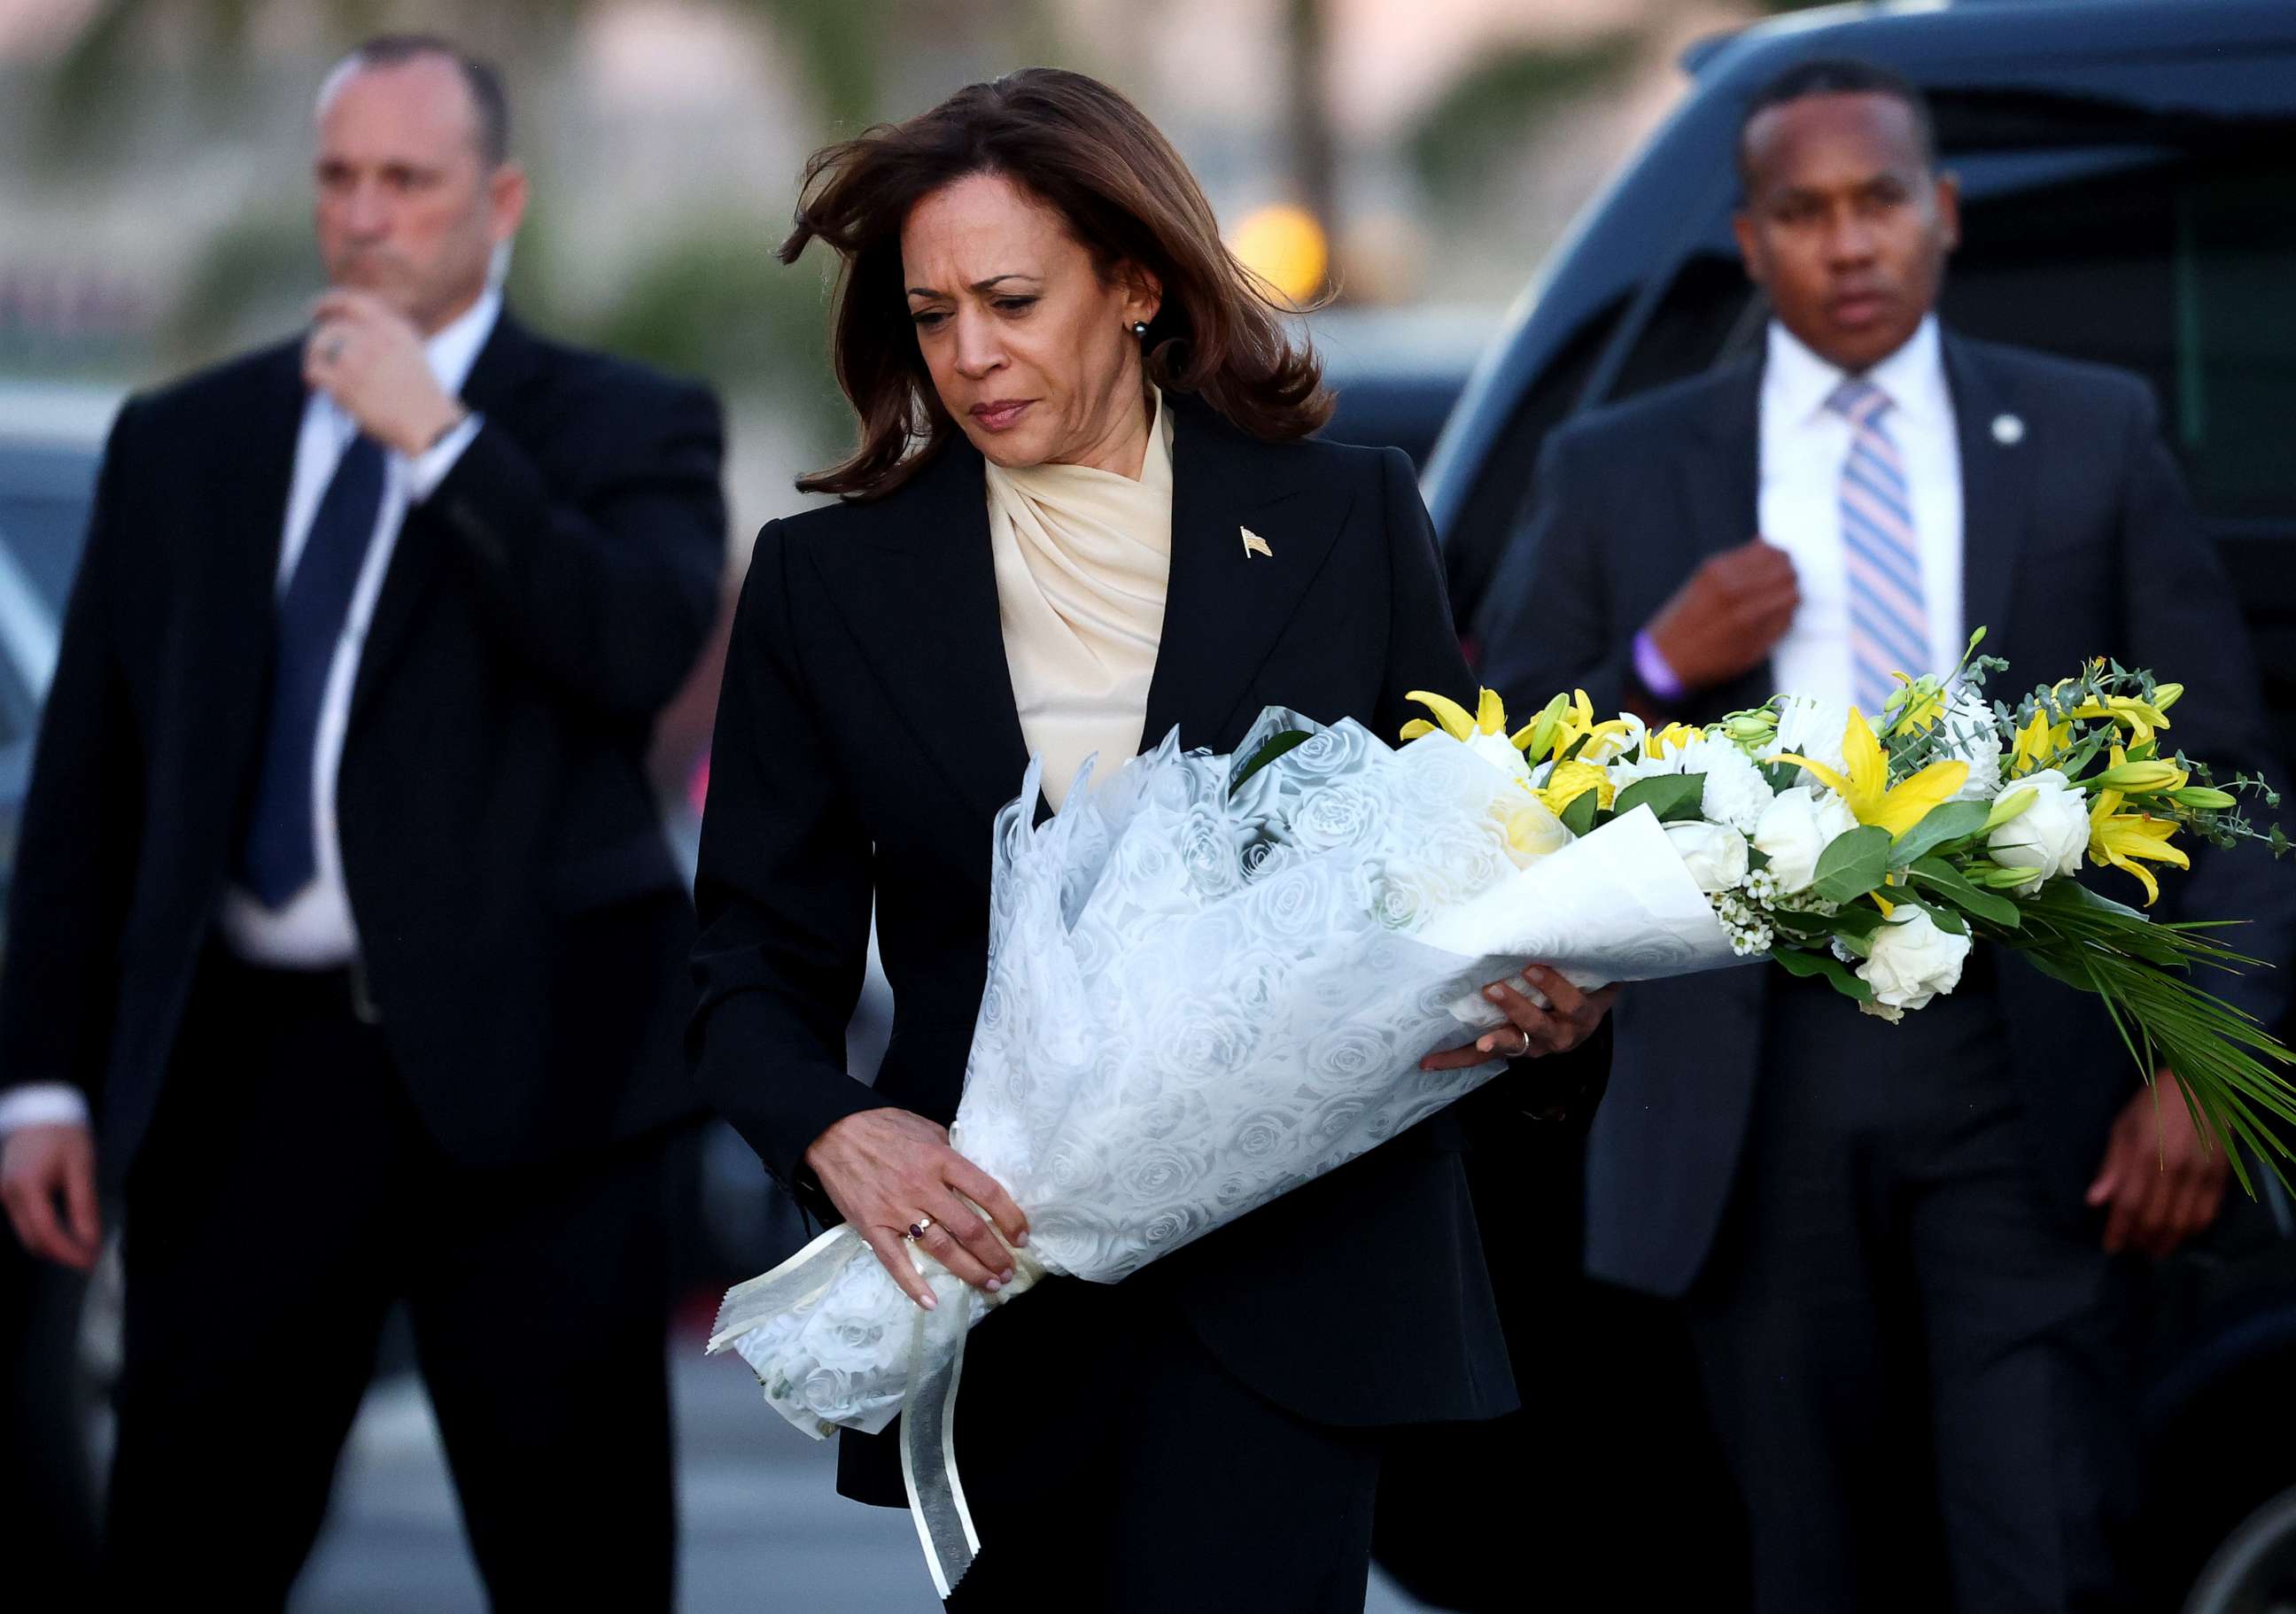 PHOTO: U.S. Vice President Kamala Harris walks to lay flowers at the memorial outside the Star Ballroom Dance Studio where a deadly mass shooting took place on January 25, 2023 in Monterey Park, California.